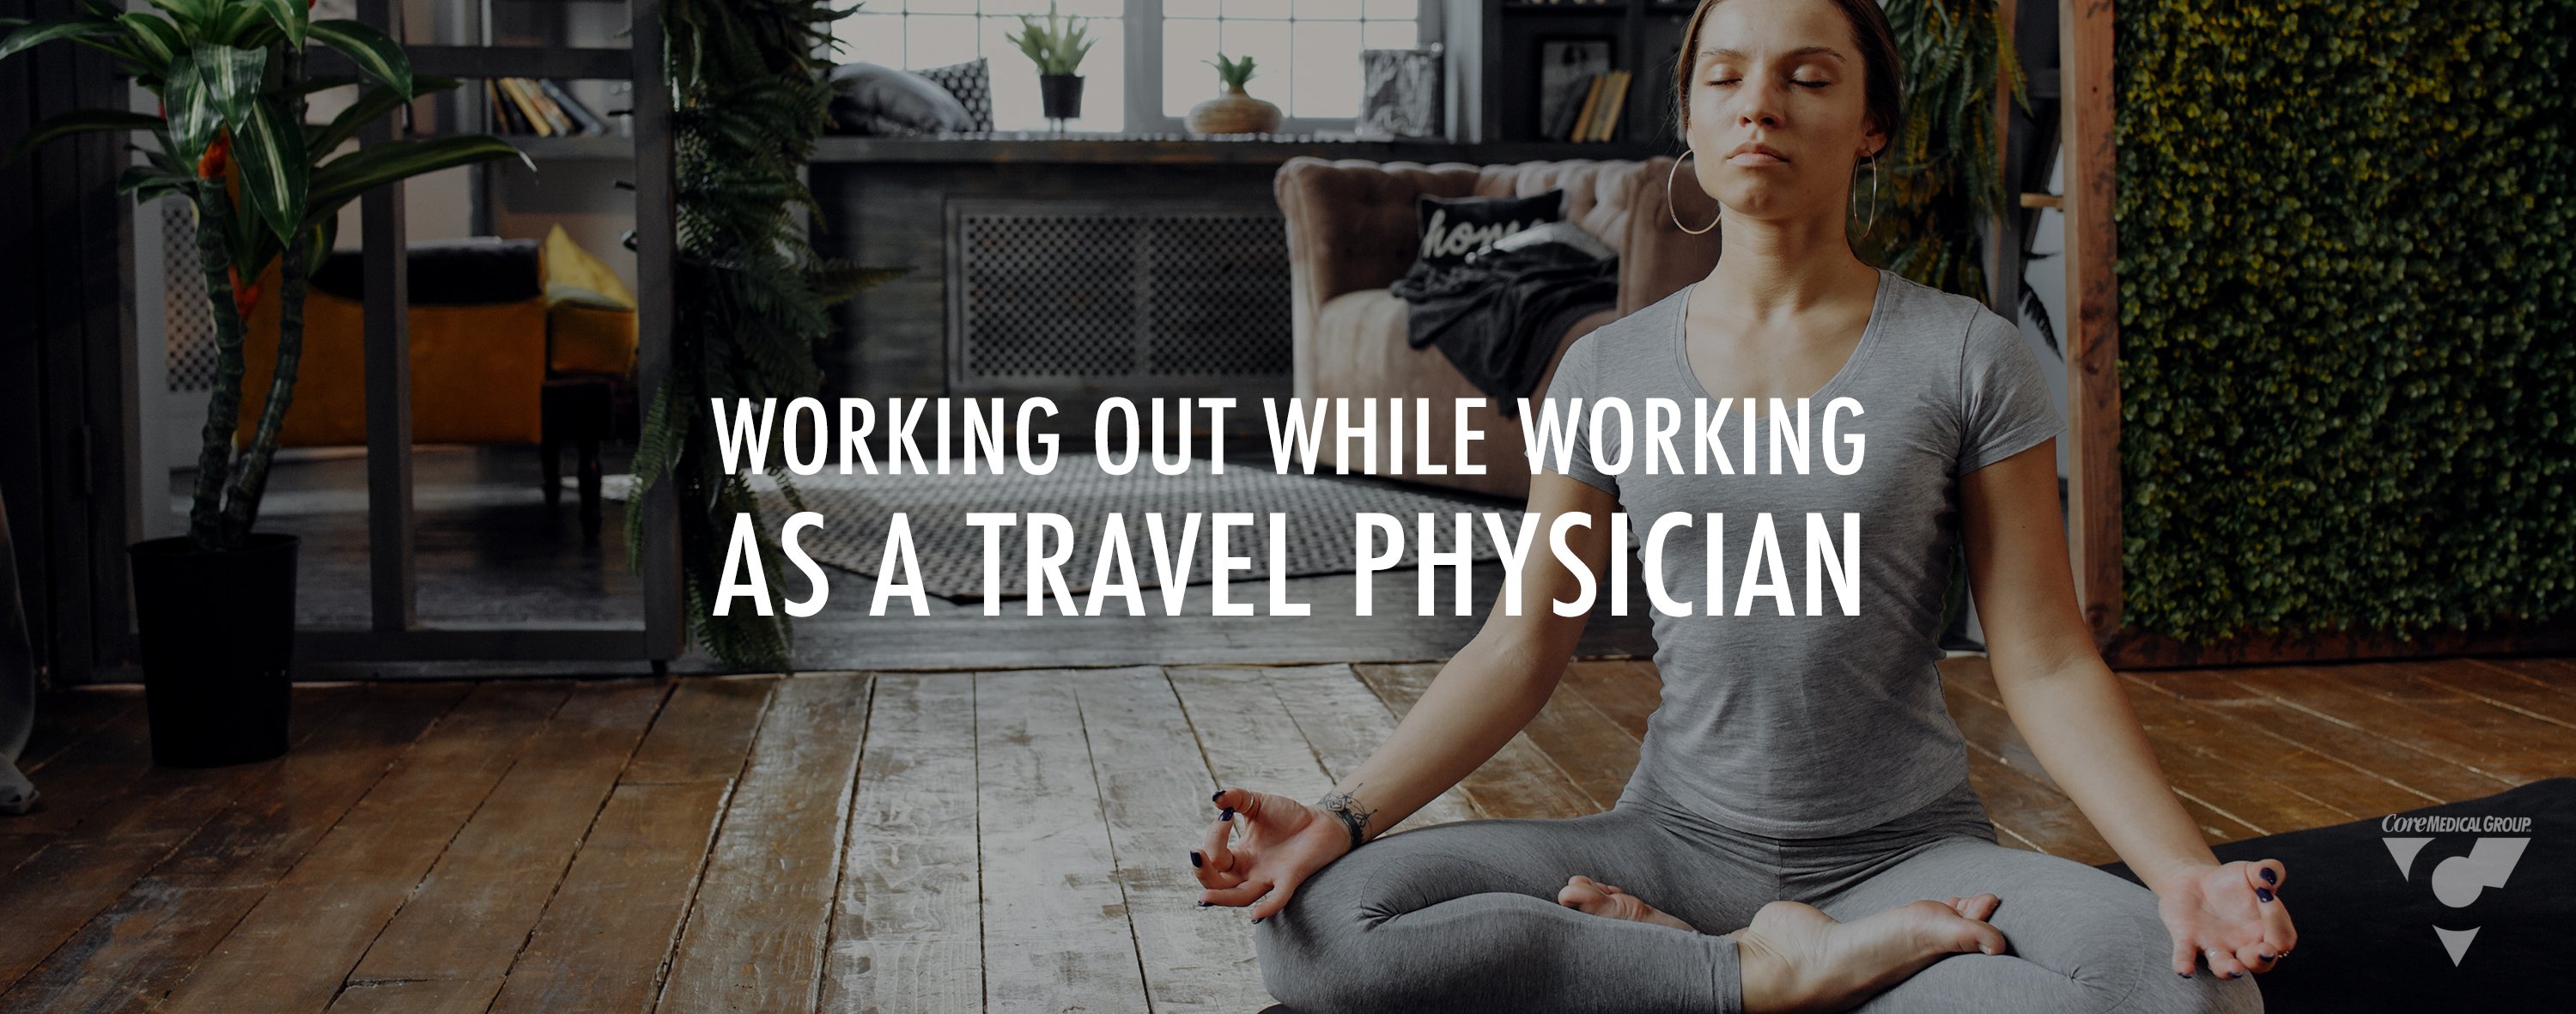 Working out while a travel physician